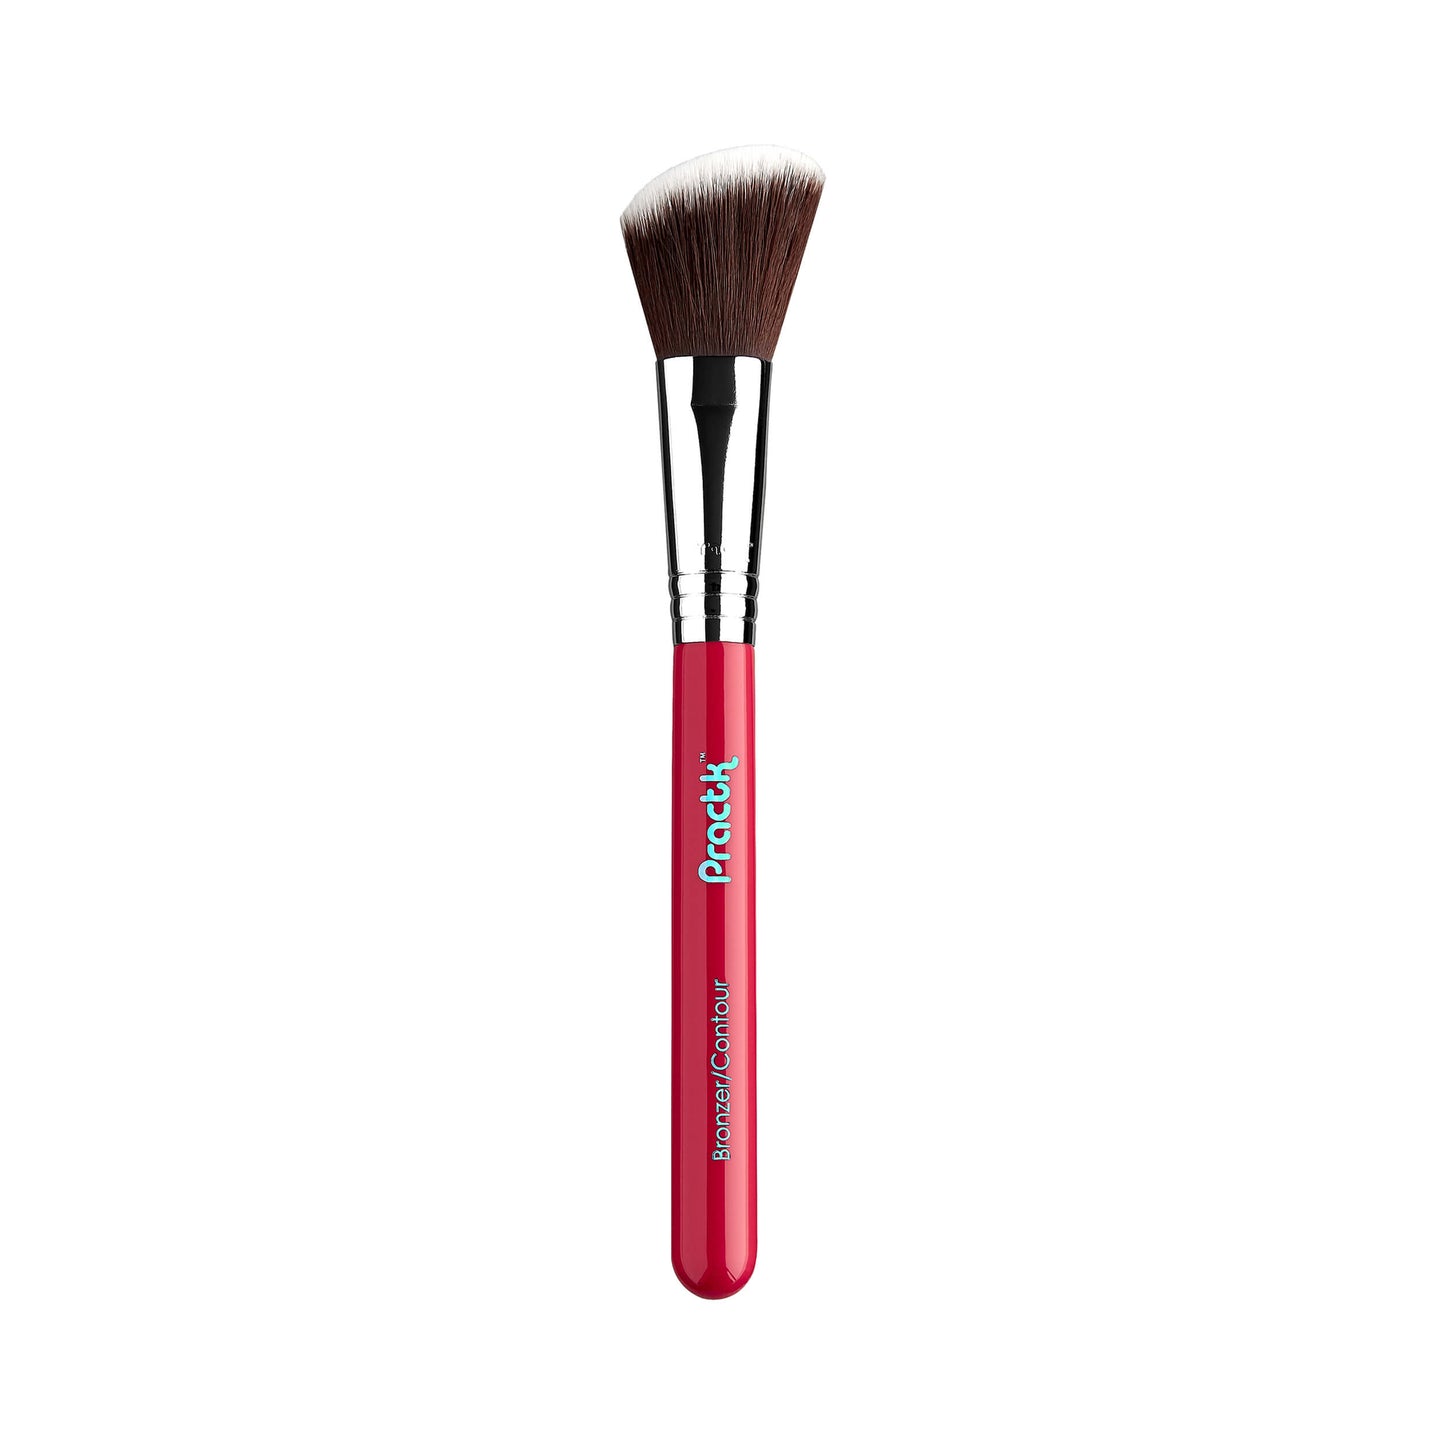 Practk (by Sigma Beauty) Bronzer Contour Brush